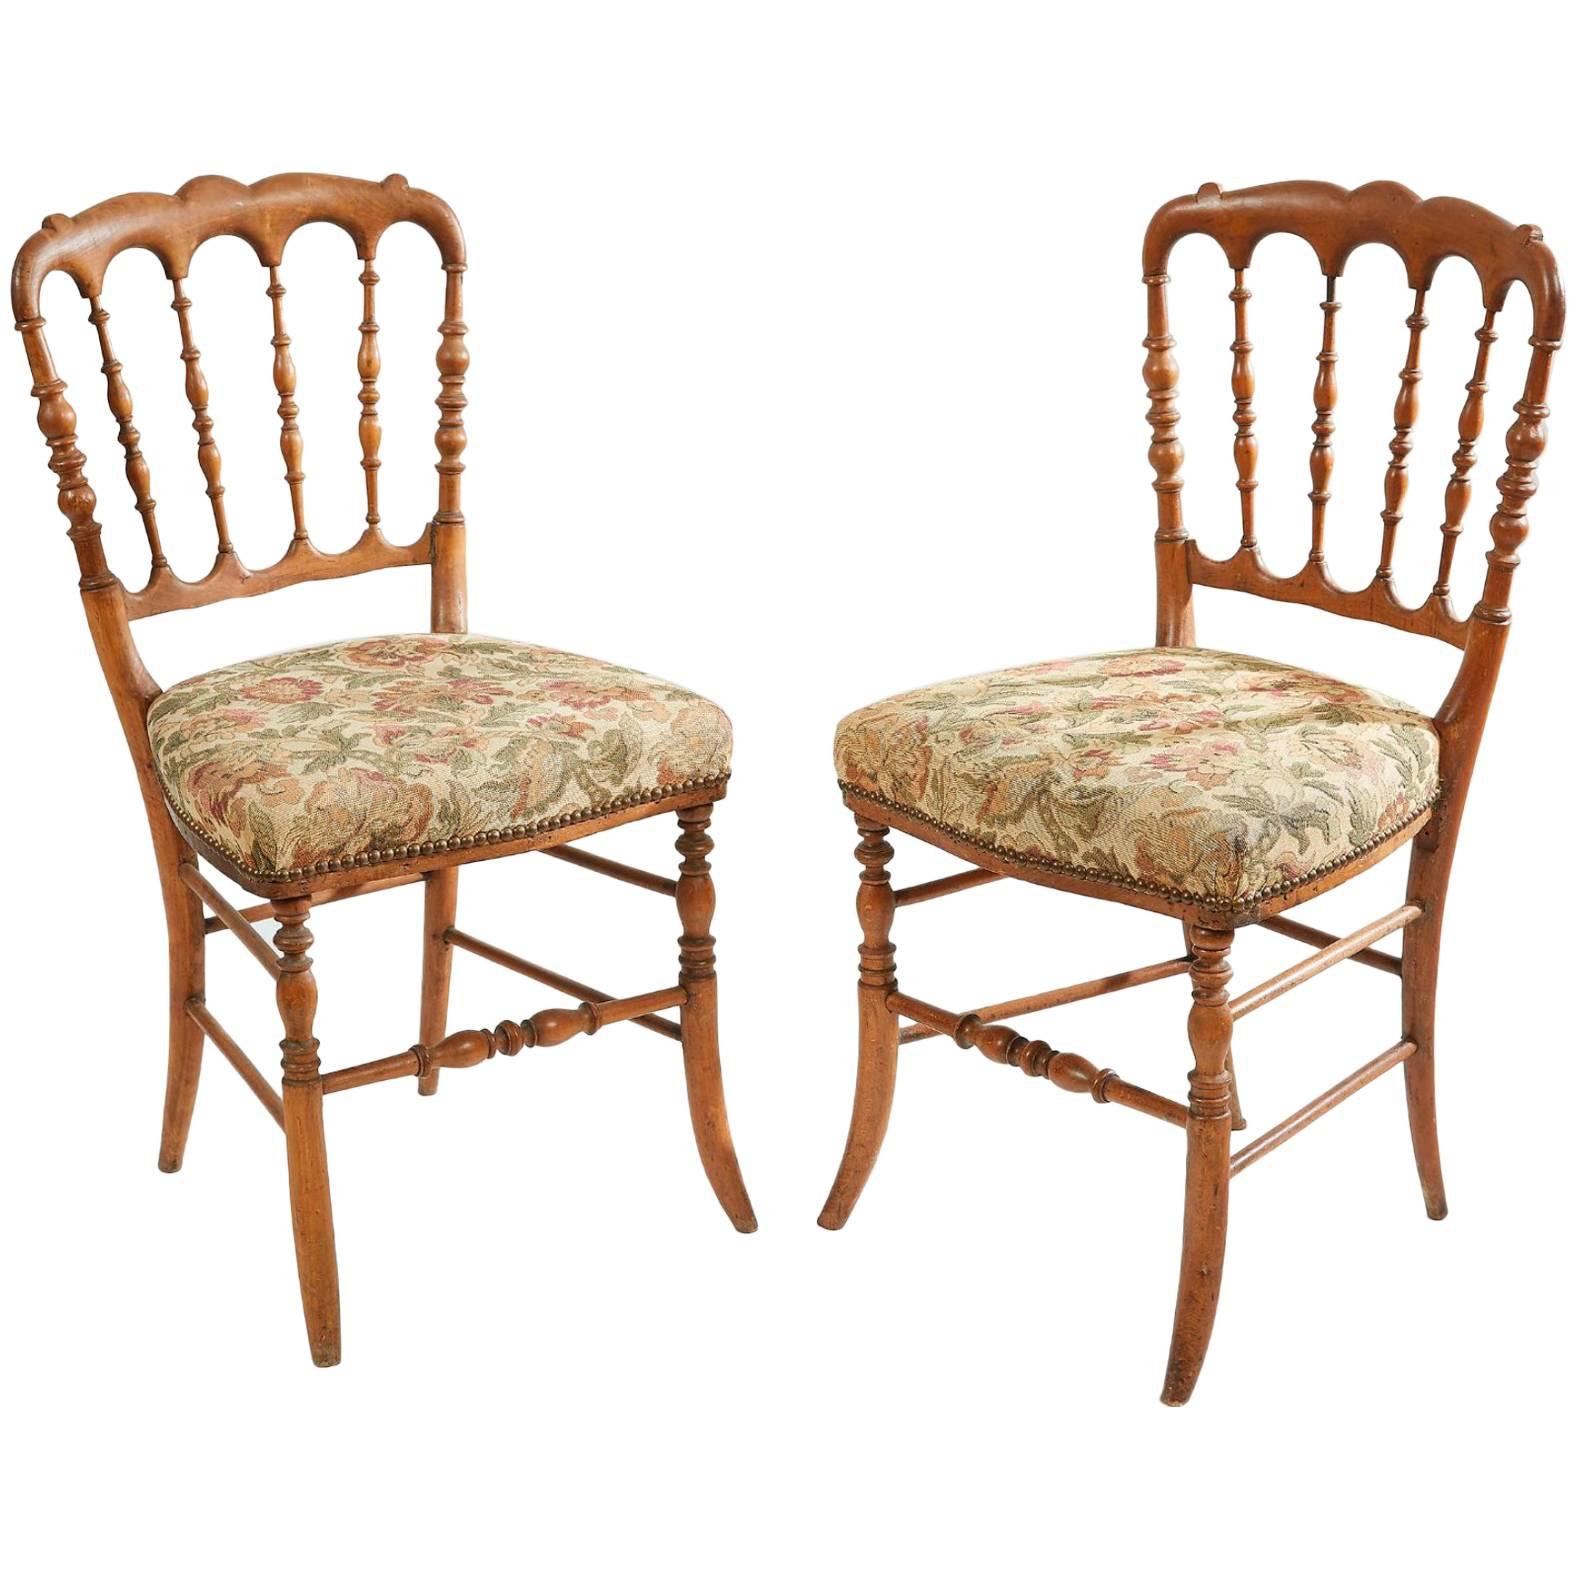 19th Century Pair of Carved Walnut Chairs from France